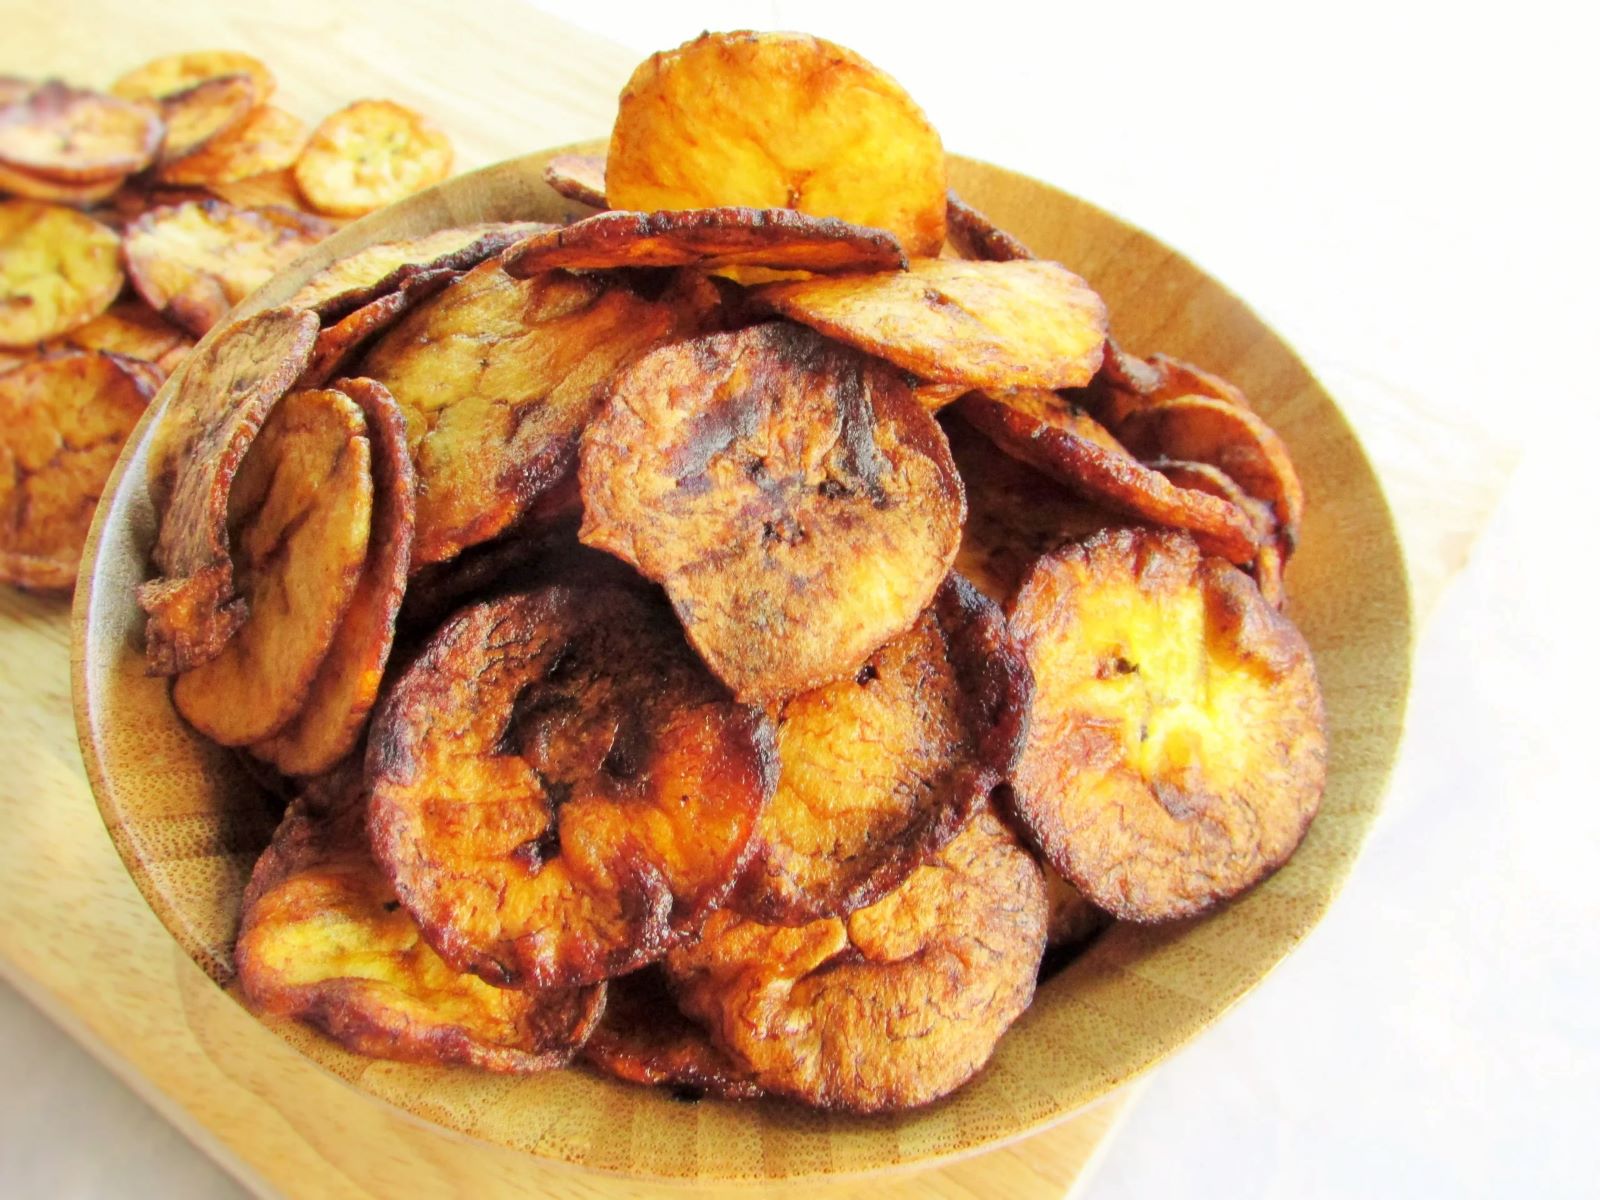 Discover The Surprising Health Benefits Of Plantain Chips Compared To Potato Chips!